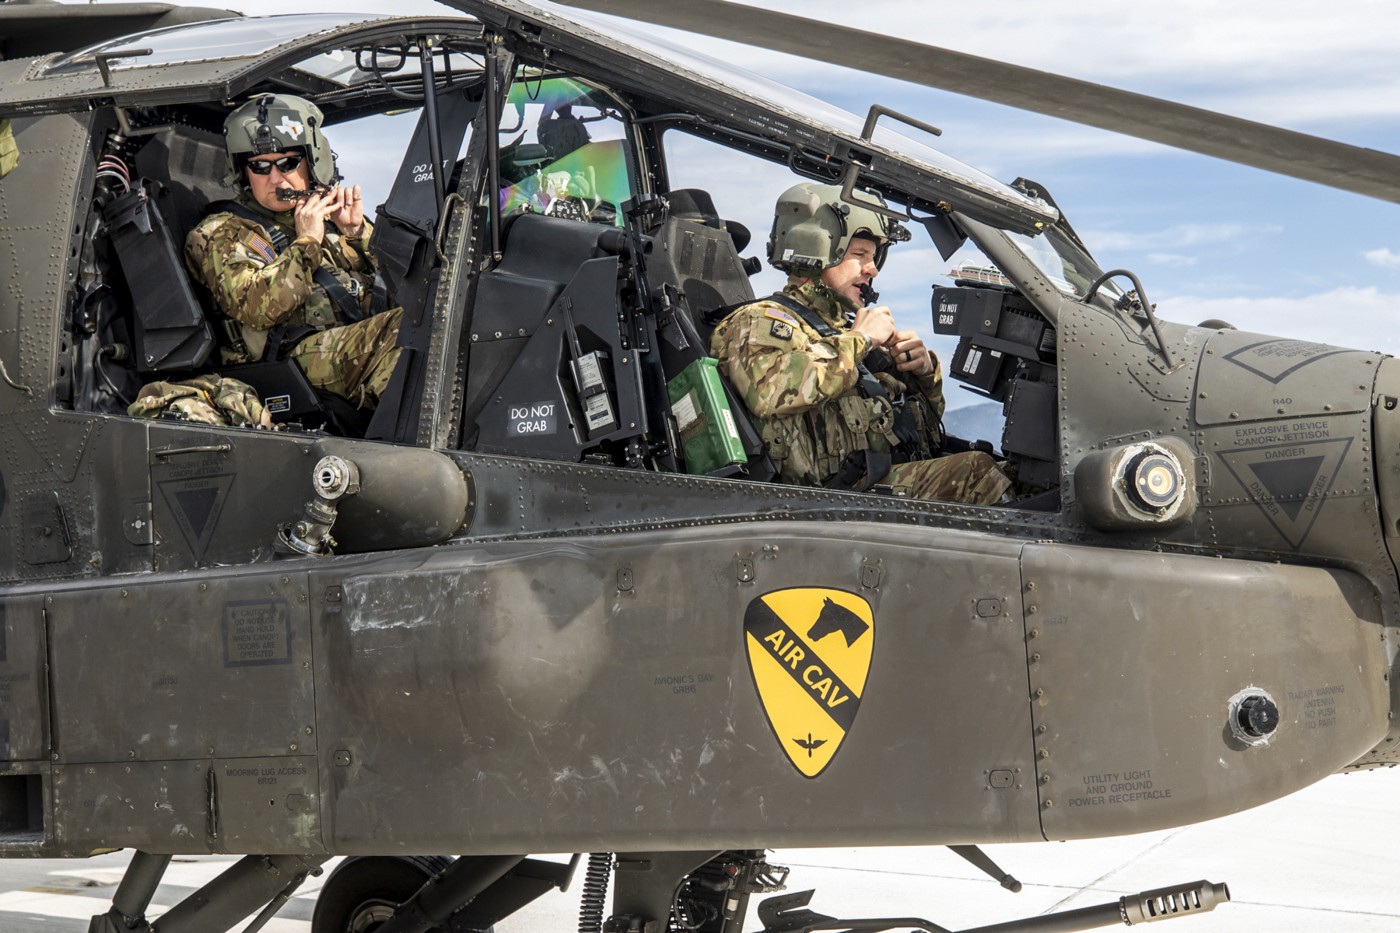 The pilot and weapons operator in the open cockpit of an AH-64 Apache helicopter, with a yellow "Air Cav" crest on the side featuring a horse head and a propellor with angelic wings. 